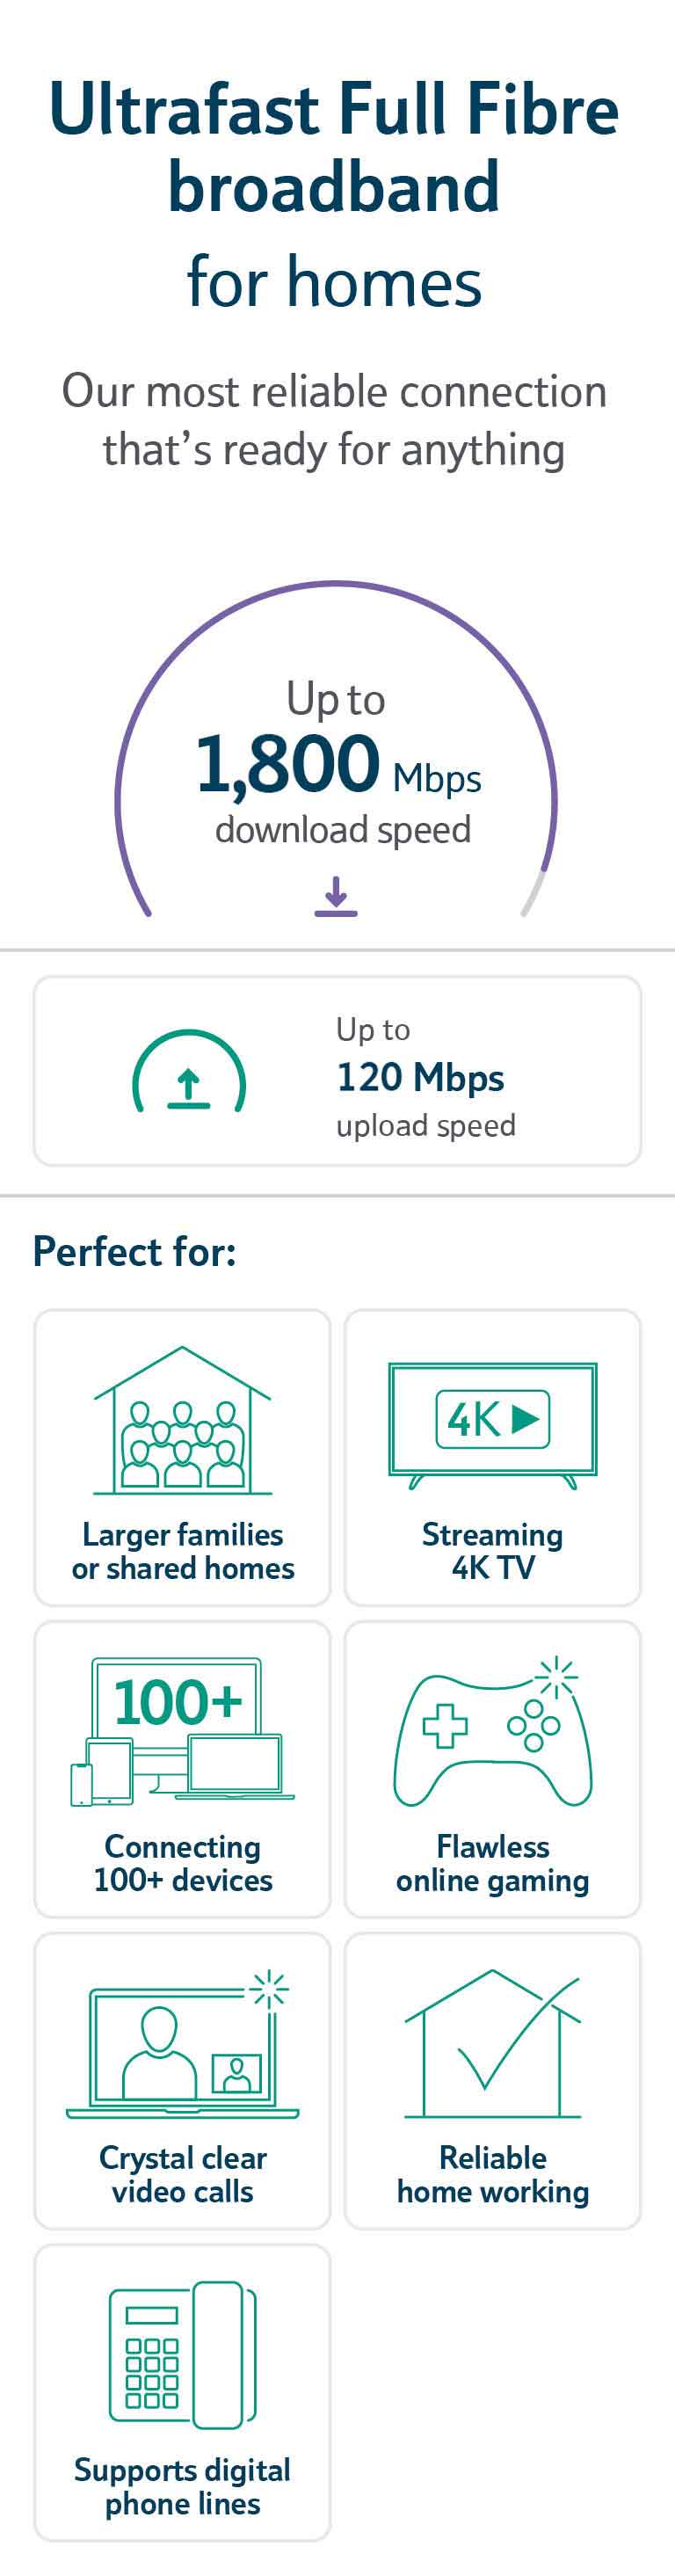 Ultrafast Full Fibre Broadband for homes product card with icons